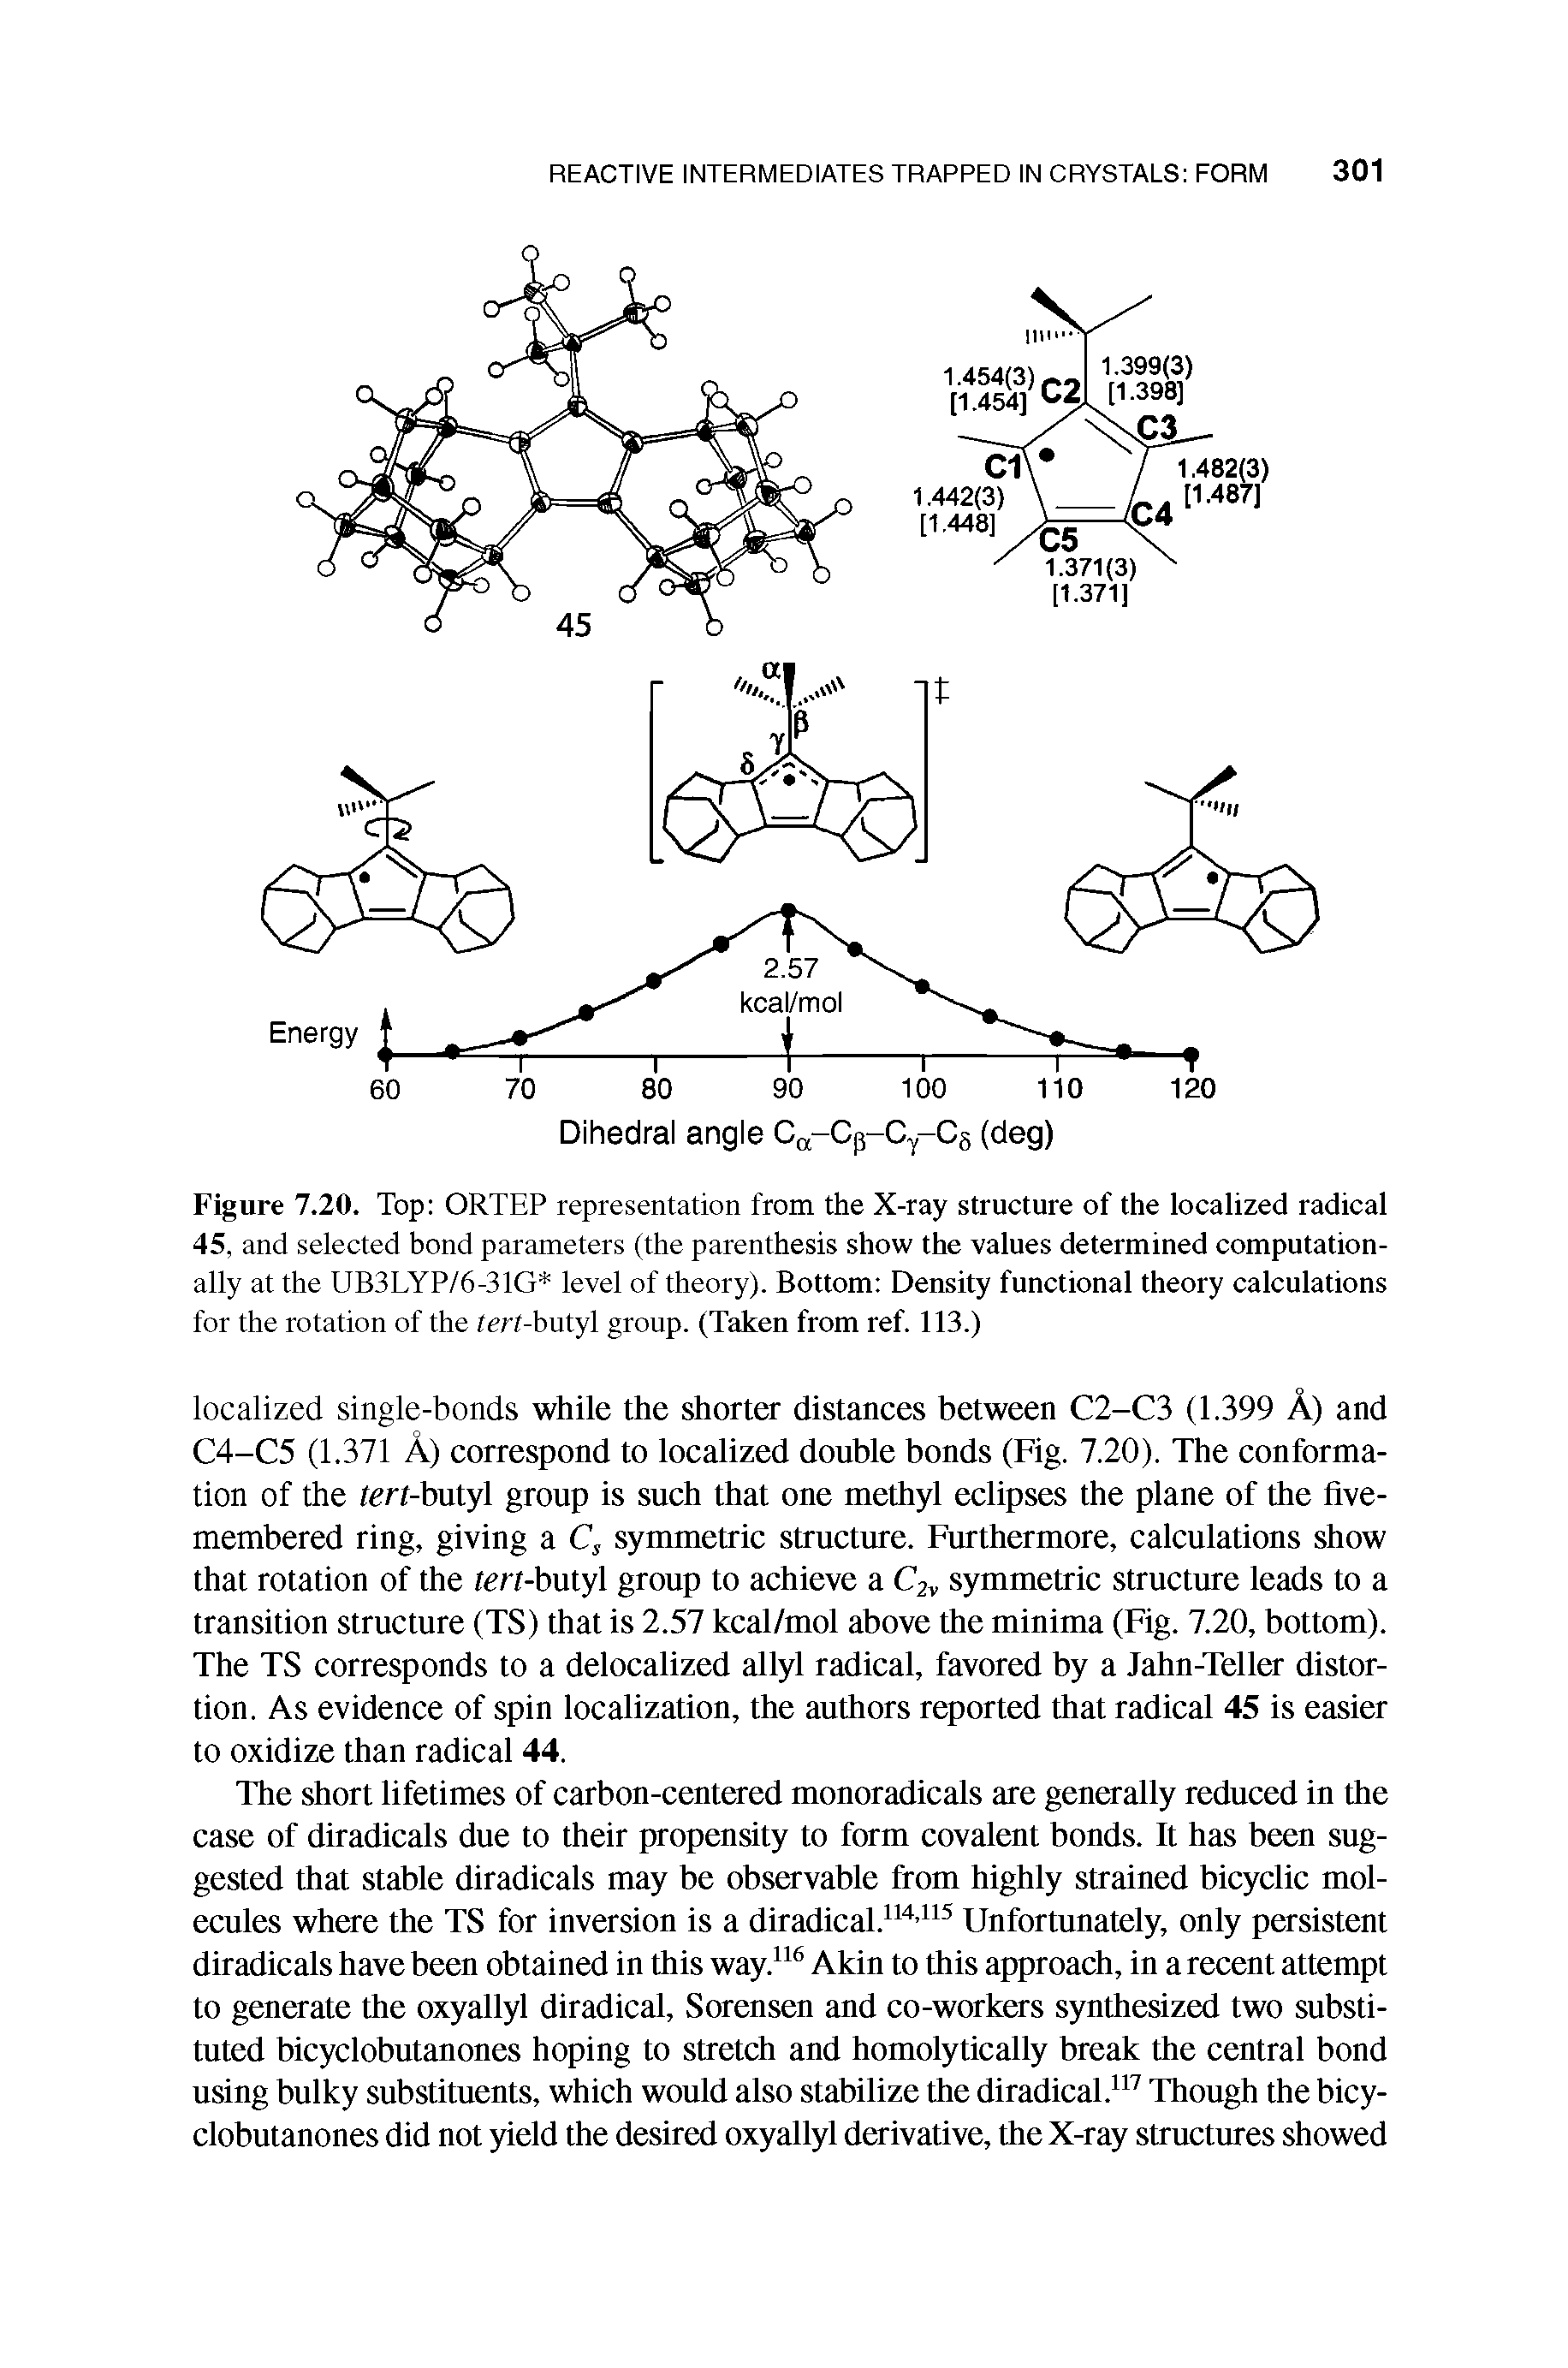 Figure 7.20. Top ORTEP representation from the X-ray structure of the localized radical 45, and selected bond parameters (the parenthesis show the values determined computationally at the UB3LYP/6-31G level of theory). Bottom Density functional theory calculations for the rotation of the tert-butyl group. (Taken from ref. 113.)...